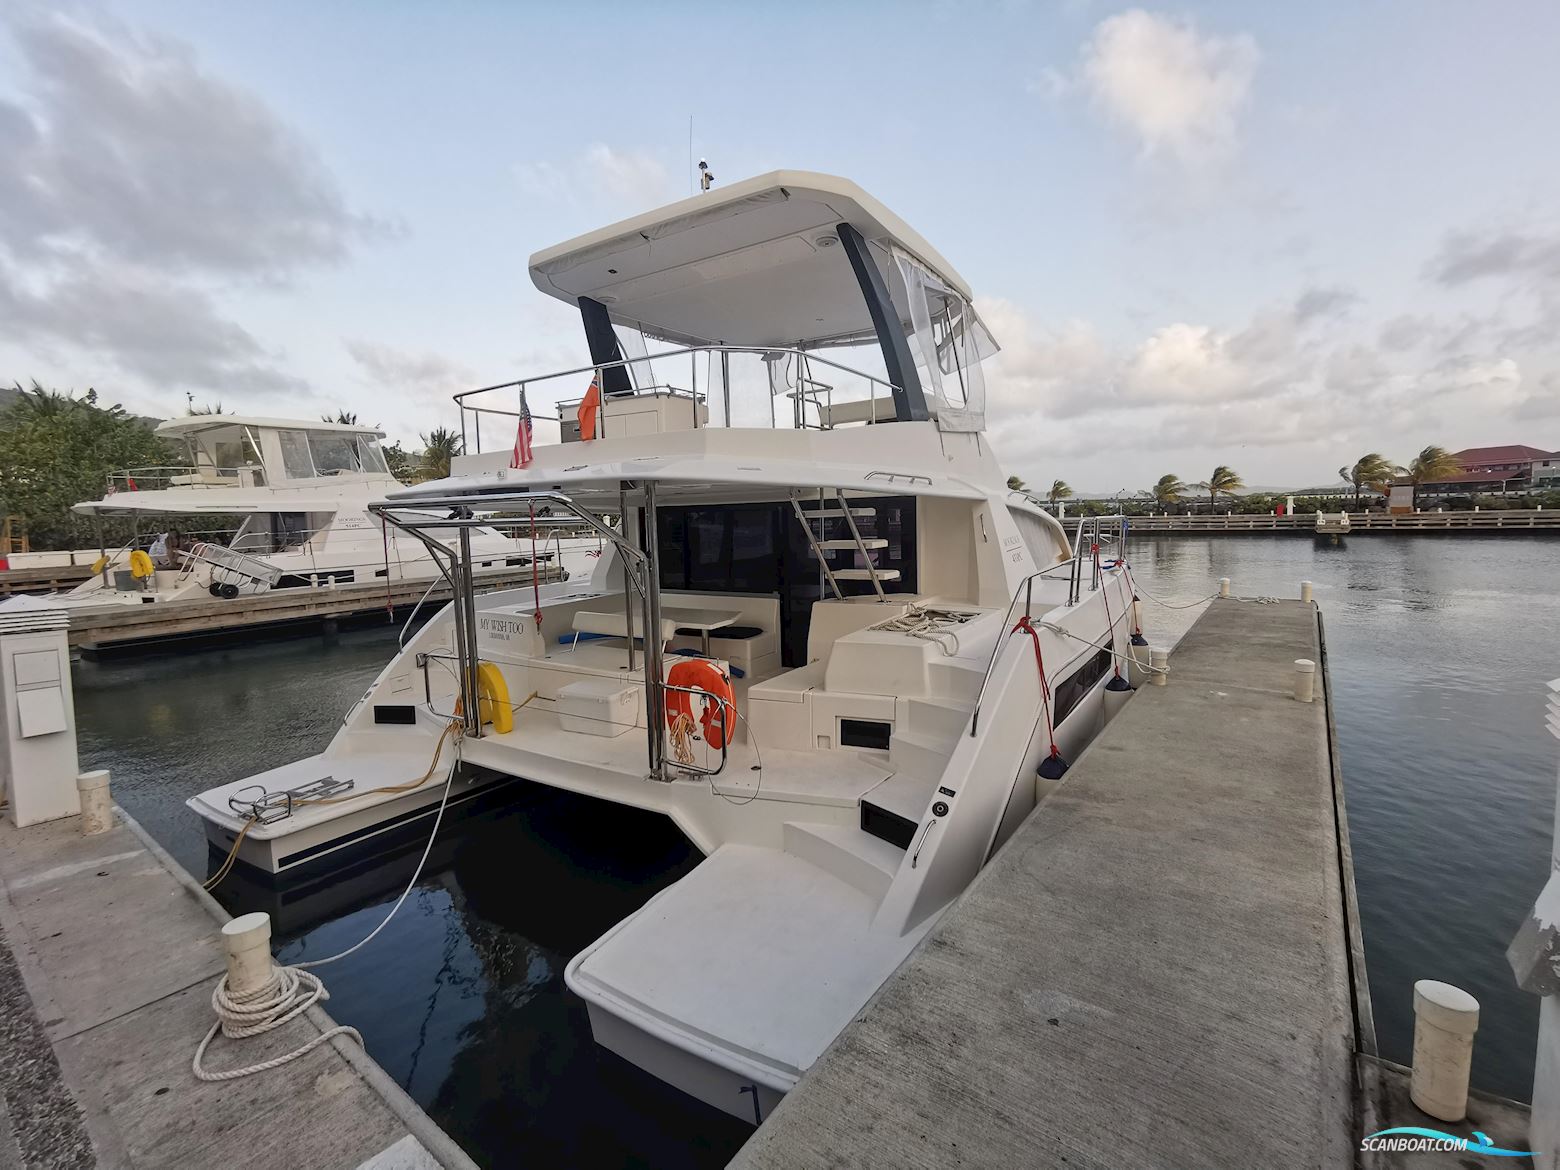 Leopard 43 Powercat Motor boat 2018, with Yanmar engine, No country info